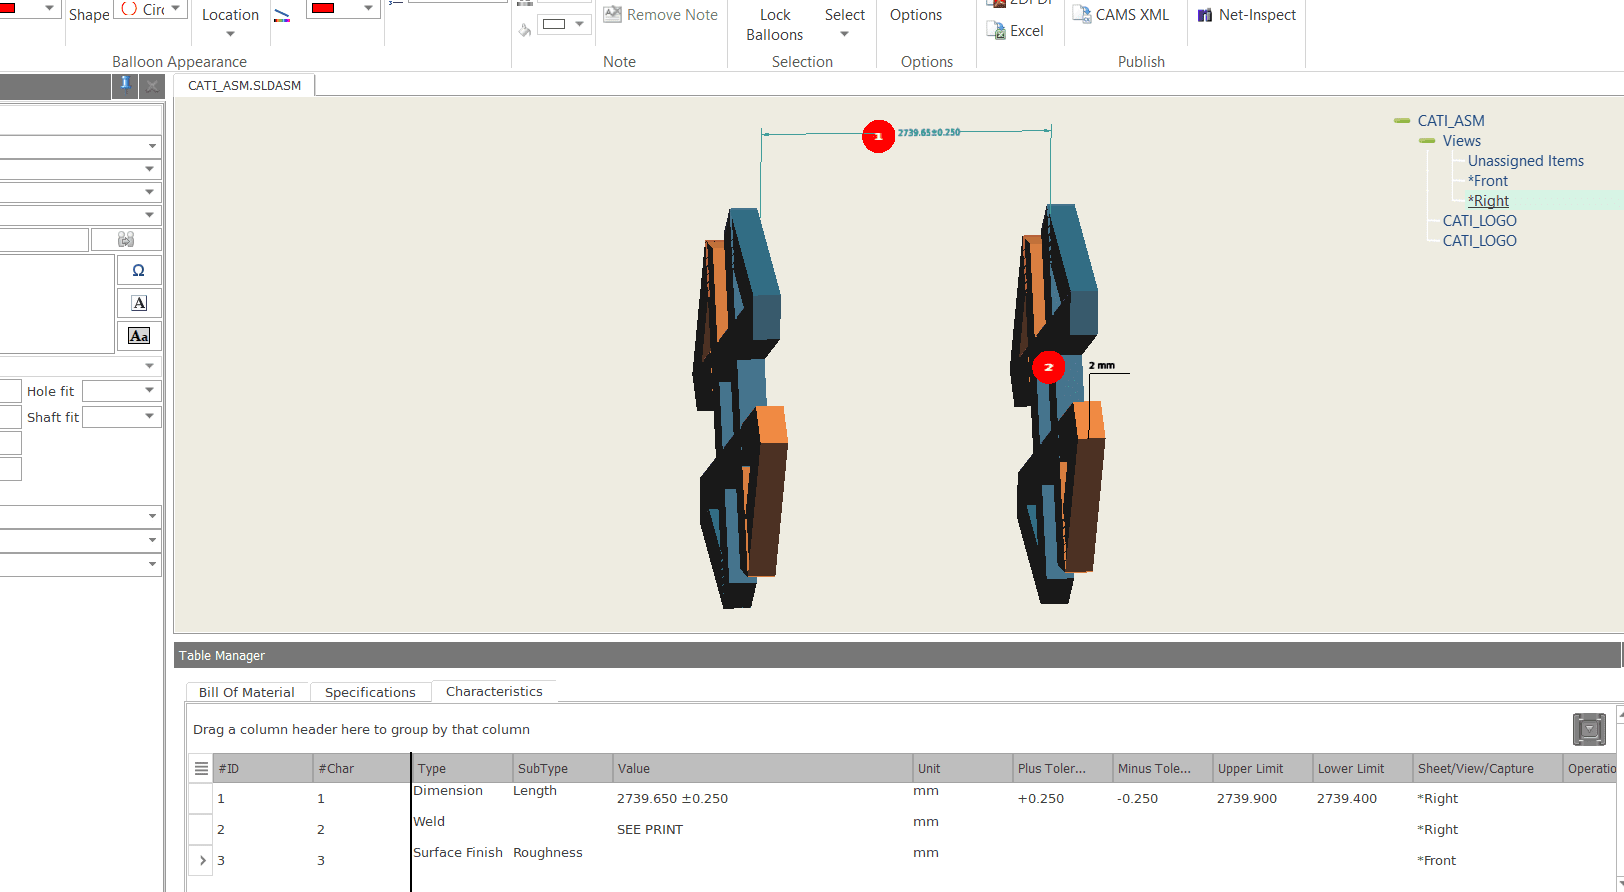 SOLIDWORKS Inspection 2022 adds support for SOLIDWORKS Assemblies in the Standalone